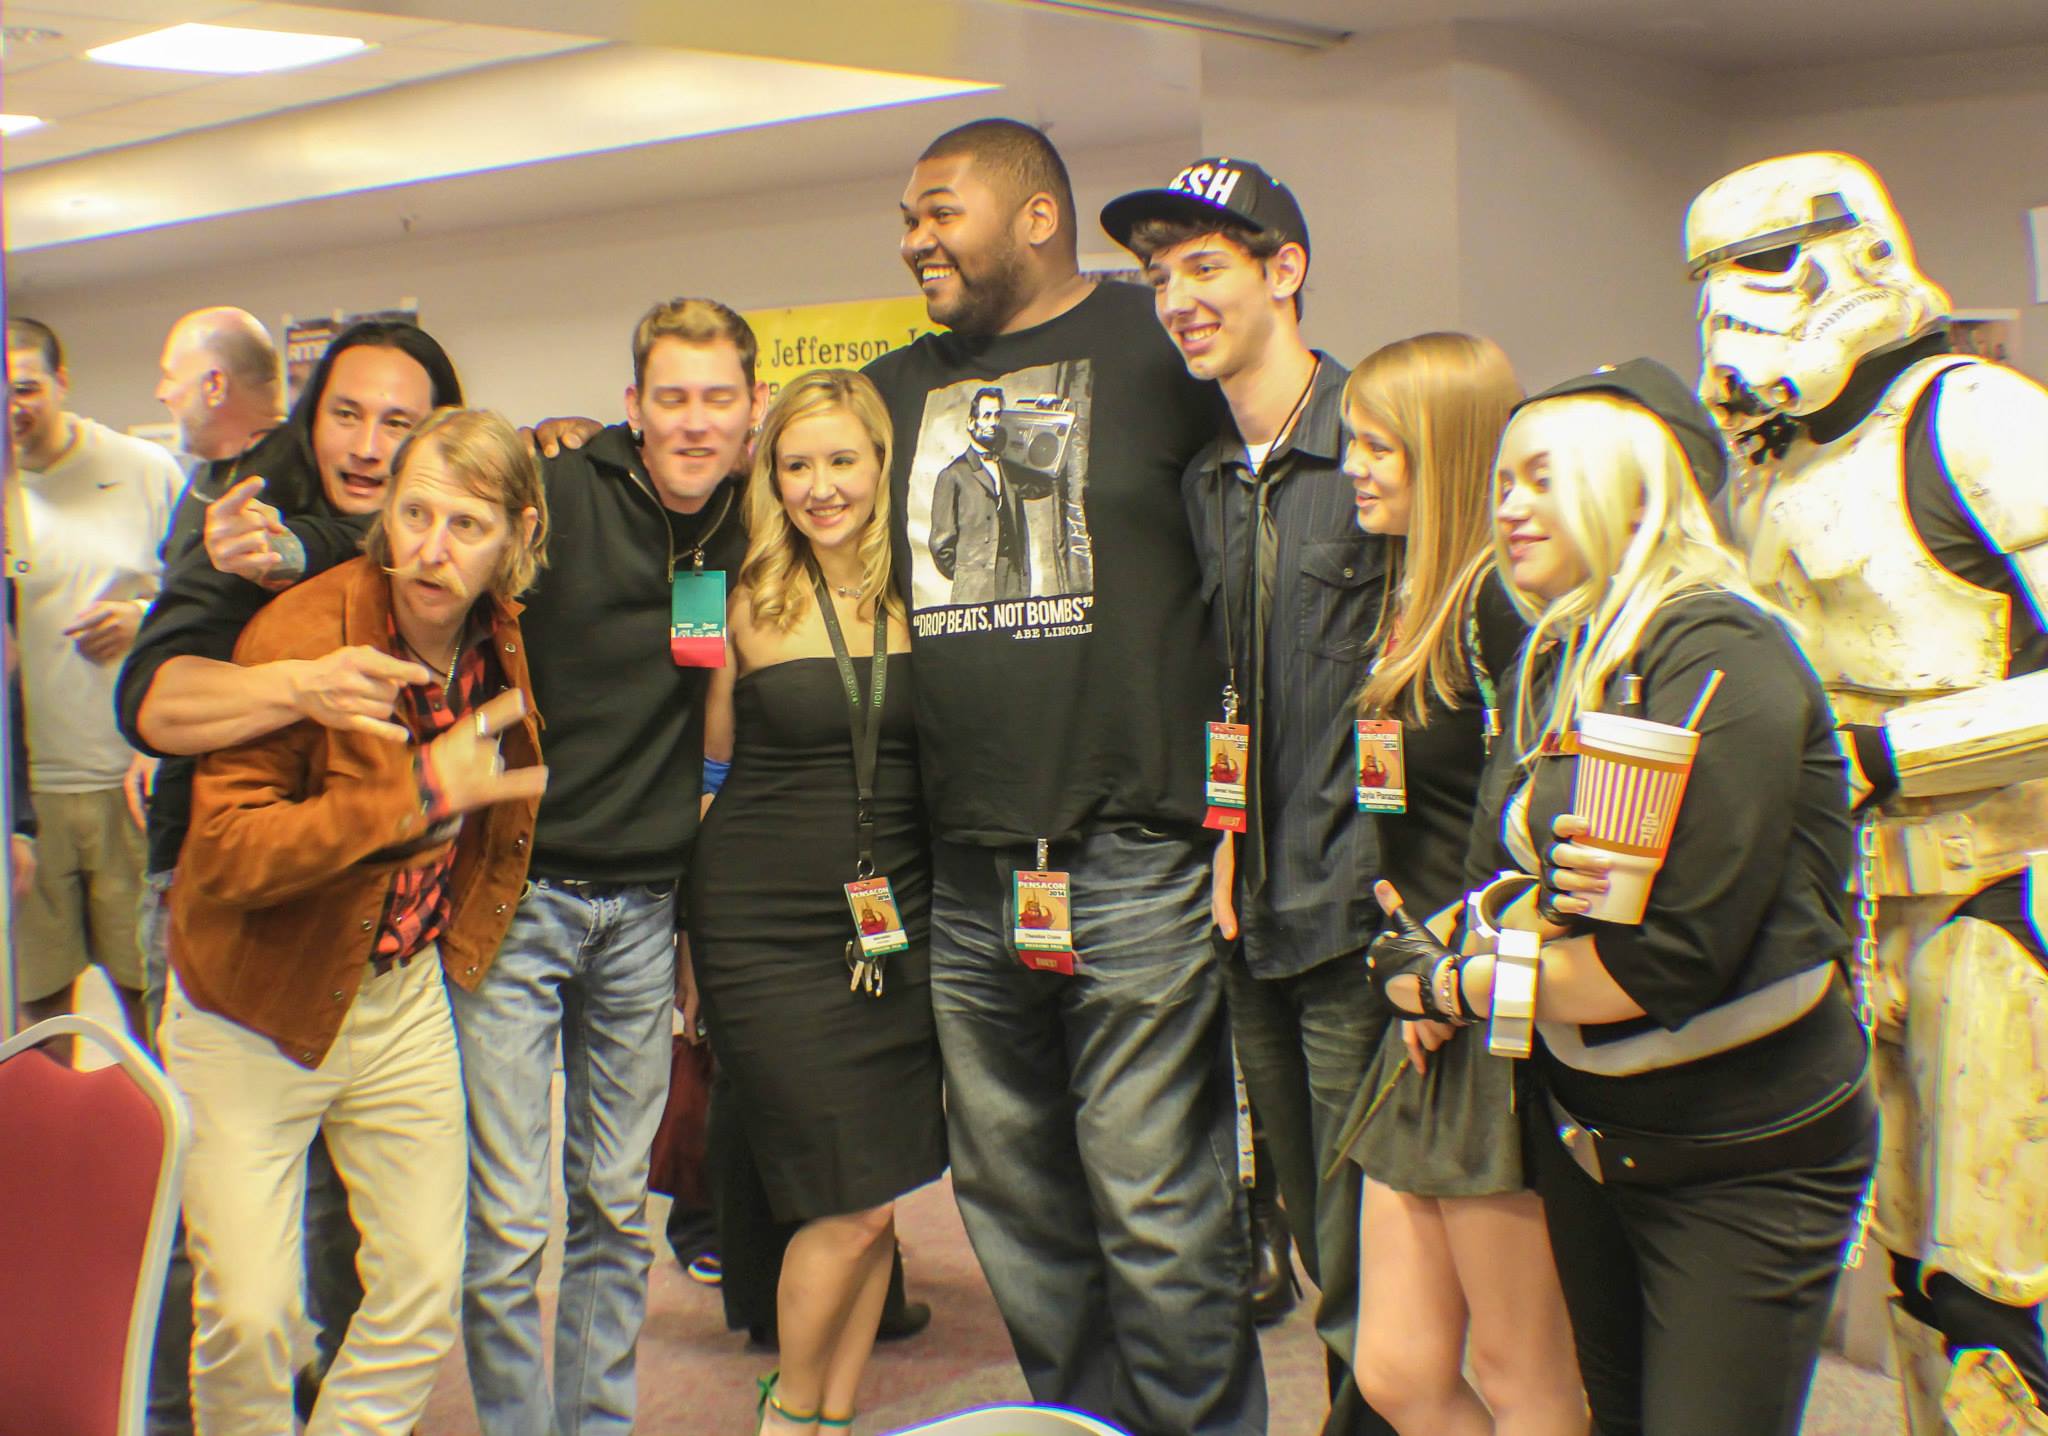 Actors(From Left to Right) Dango Nu Yen, Lew Temple, Michael Koske, Theodus Crane and Jerrad Vunovich from The Walking Dead posing with fans during a picture while at PENSACON 2014